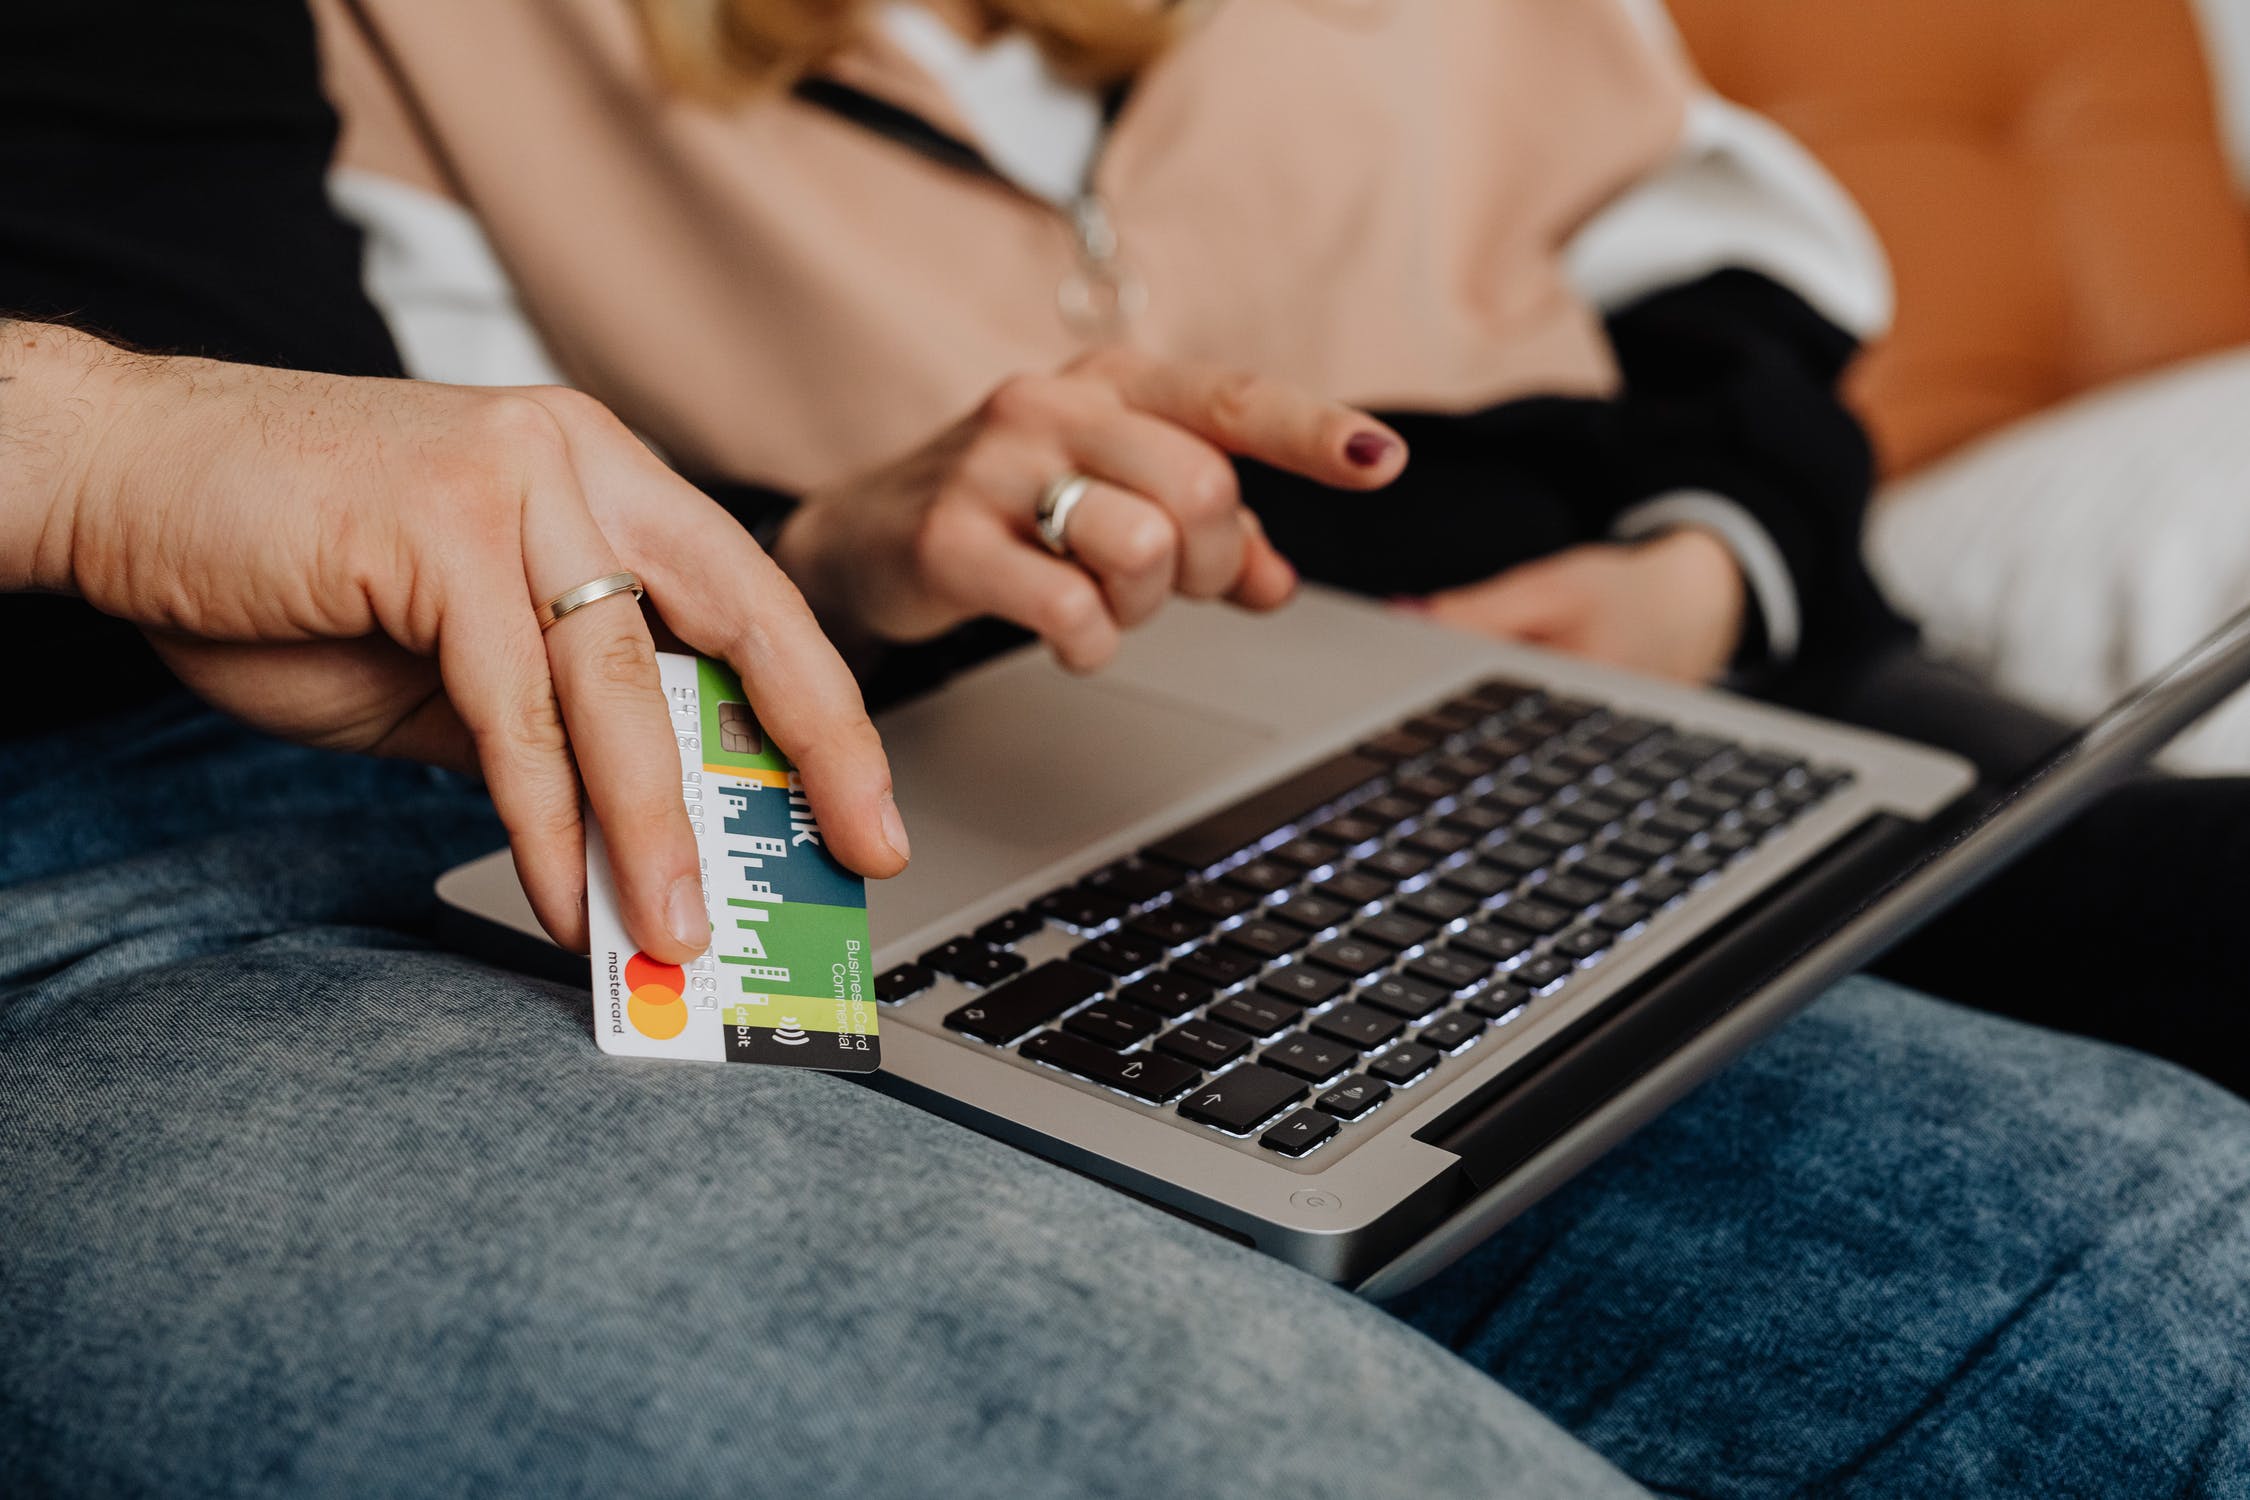 Credit cards create financial convenience for us. However, they also have certain drawbacks. Experts discuss the pros and cons of credit cards.